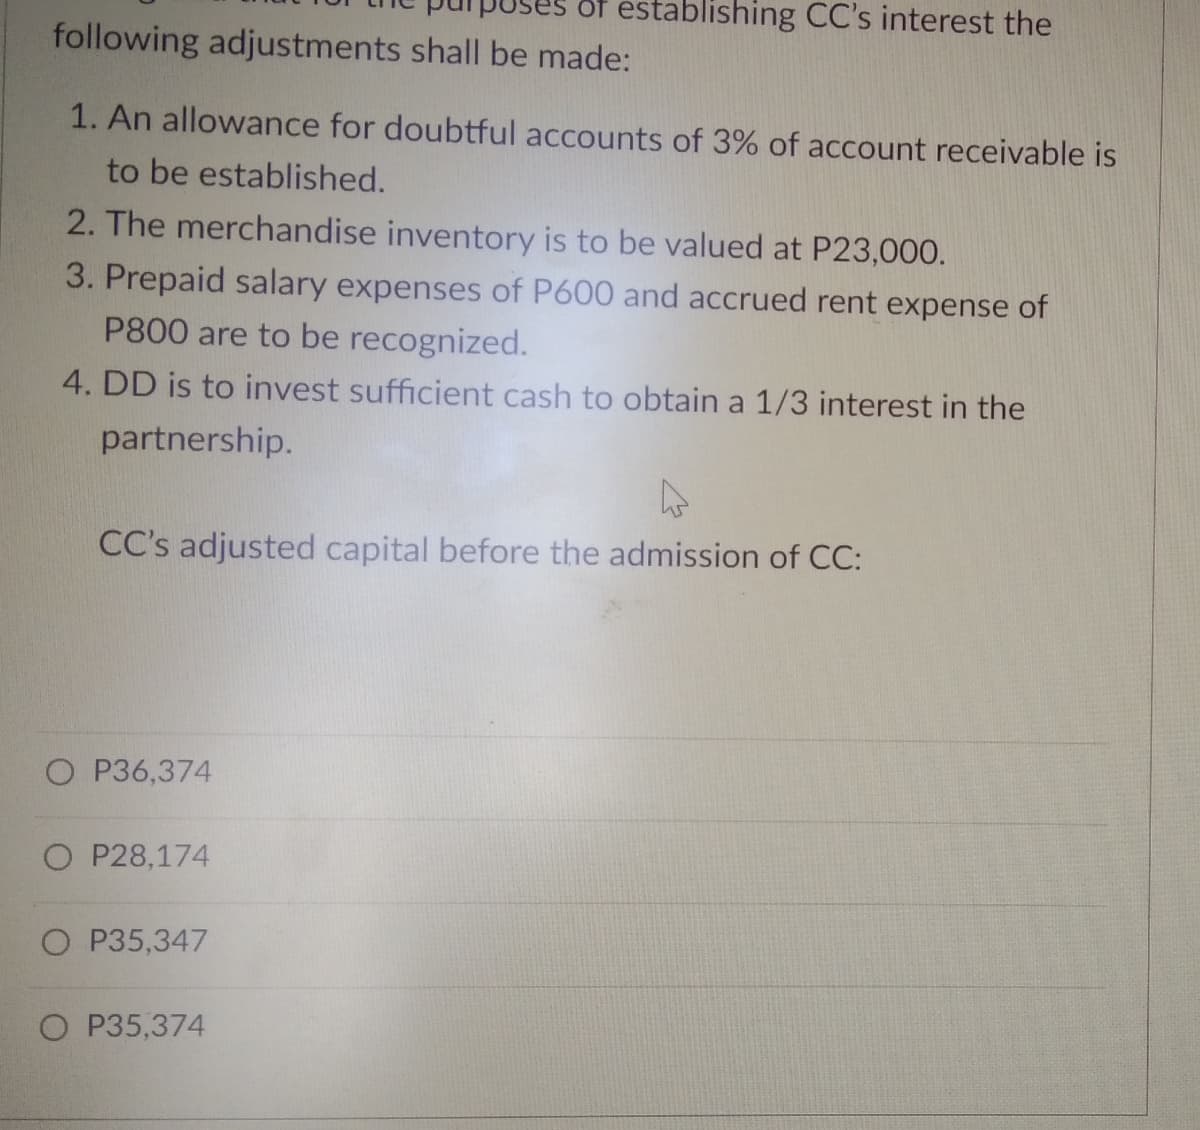 öf establishing CC's interest the
following adjustments shall be made:
1. An allowance for doubtful accounts of 3% of account receivable is
to be established.
2. The merchandise inventory is to be valued at P23,000.
3. Prepaid salary expenses of P600 and accrued rent expense of
P800 are to be recognized.
4. DD is to invest sufficient cash to obtain a 1/3 interest in the
partnership.
CC's adjusted capital before the admission of CC:
O P36,374
O P28,174
O P35,347
O P35,374
